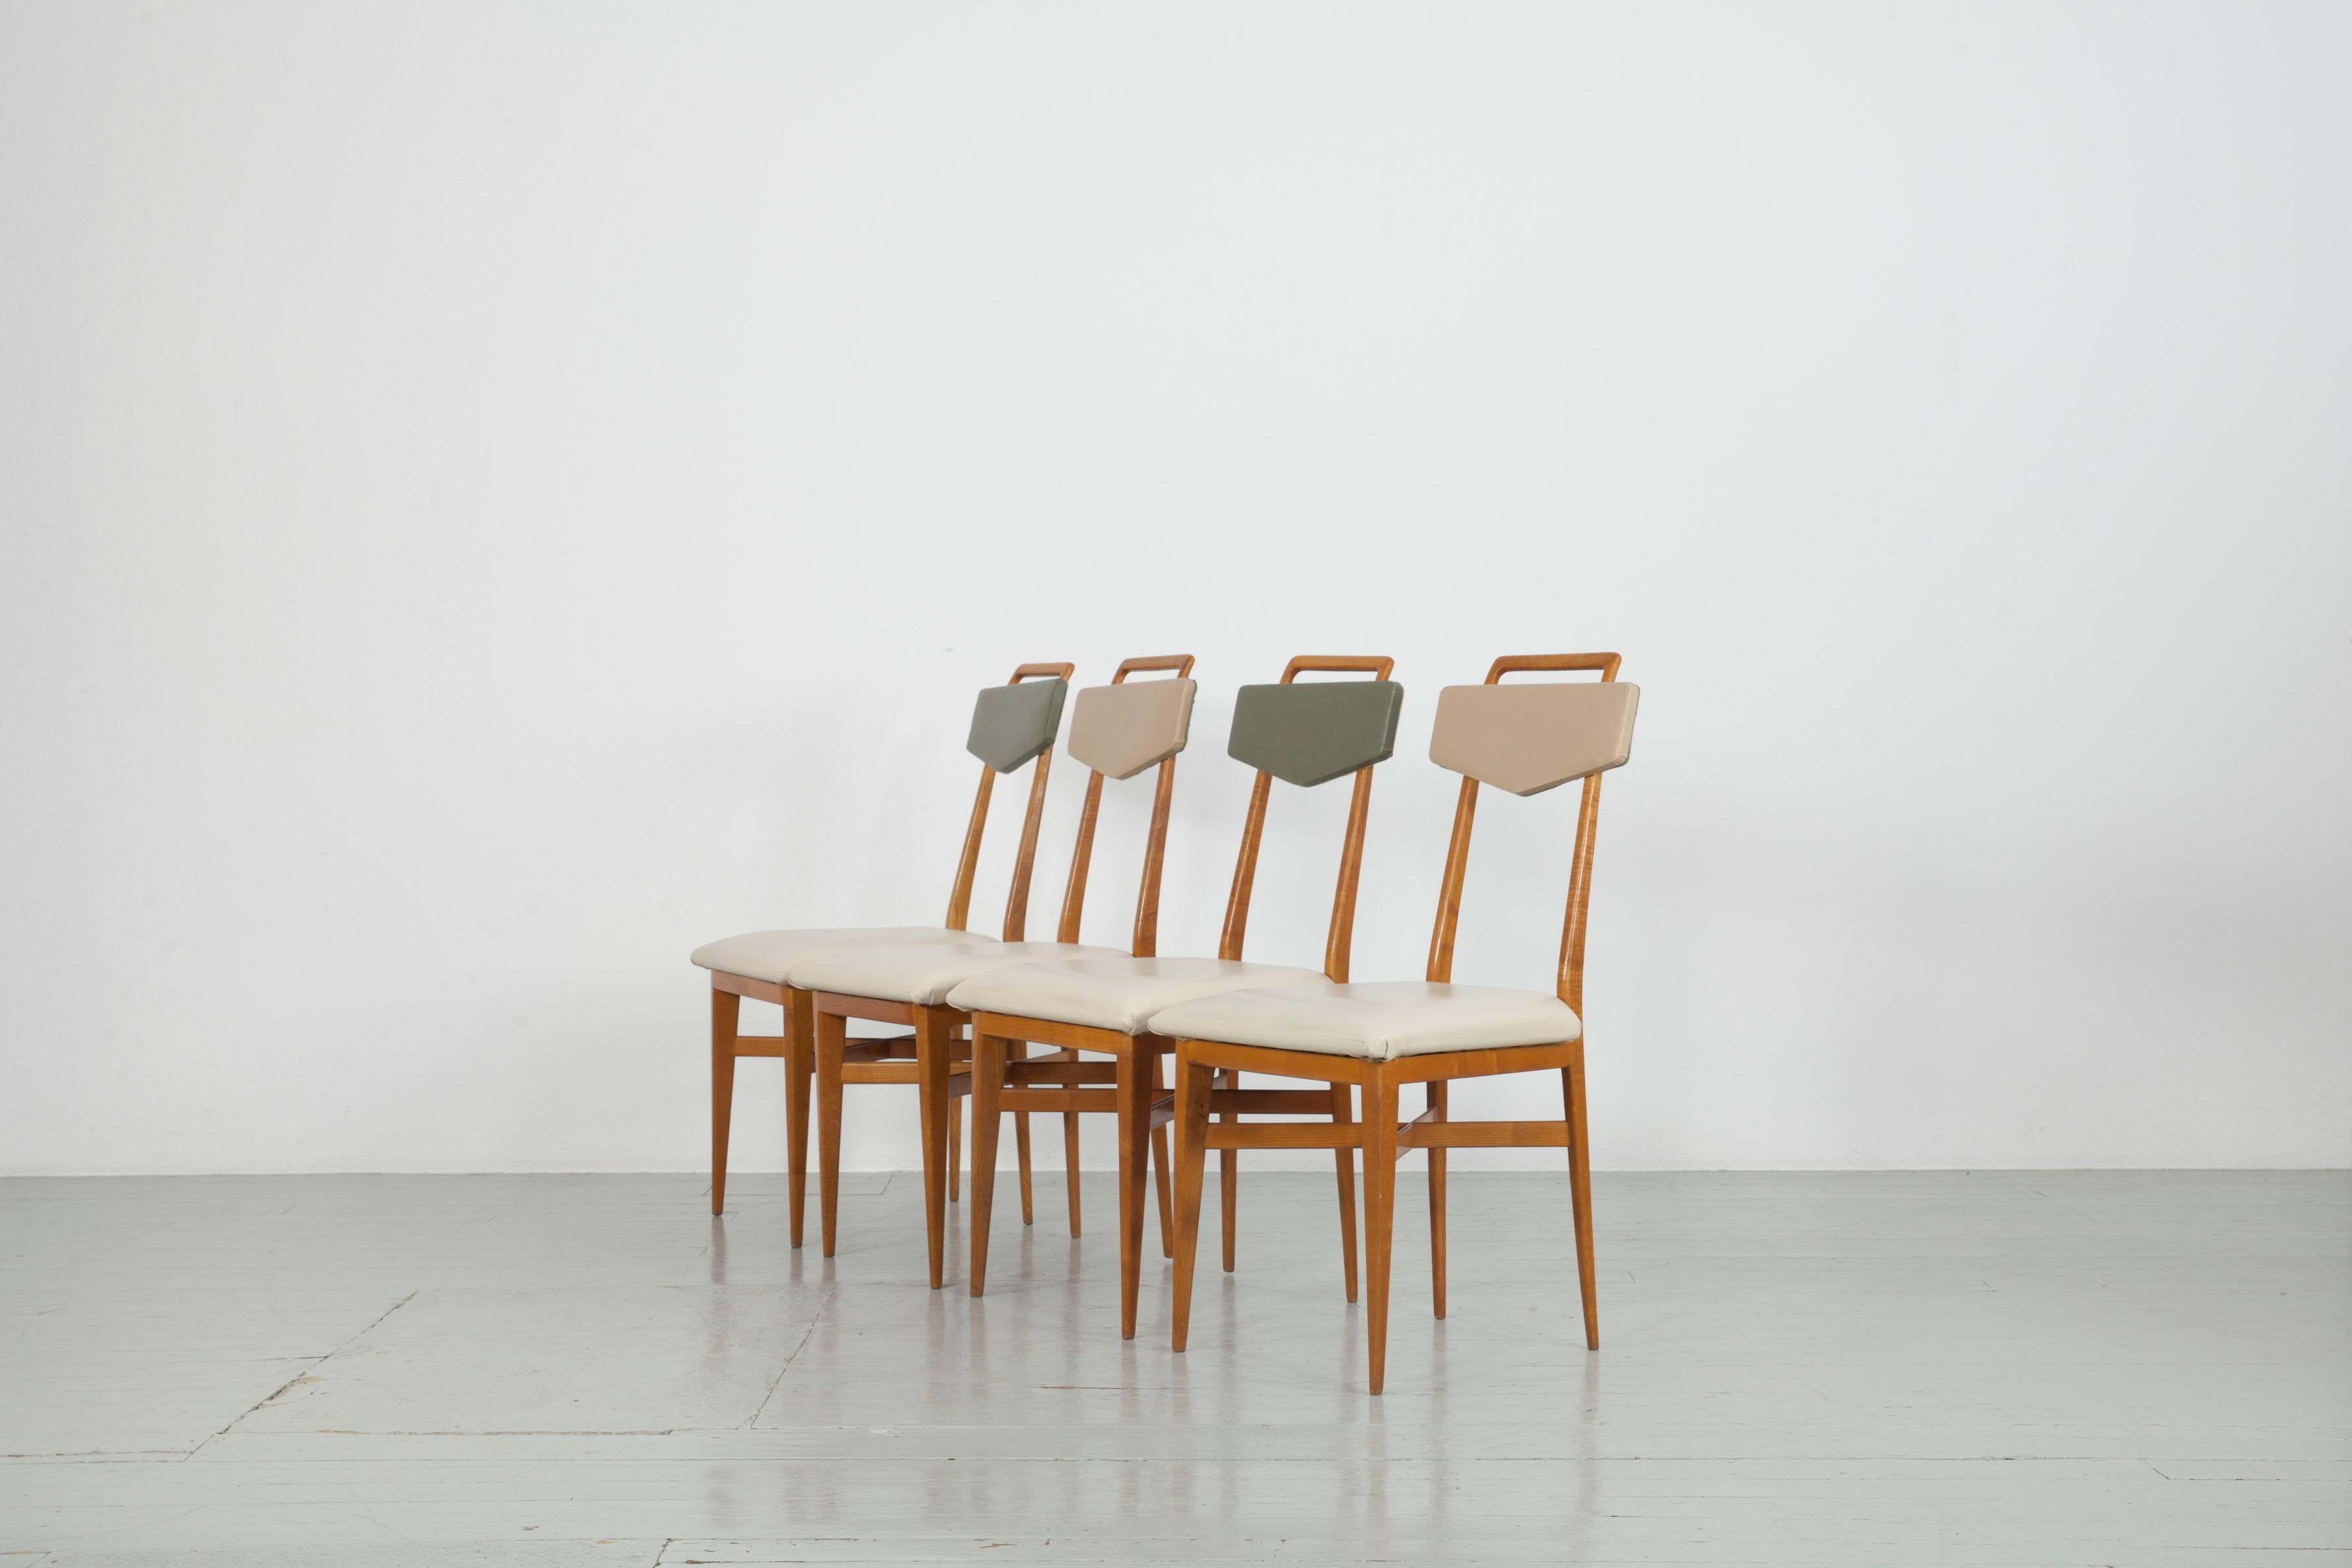 Set of 6 Scuola Torinese Chairs, Italy, 1950s For Sale 2